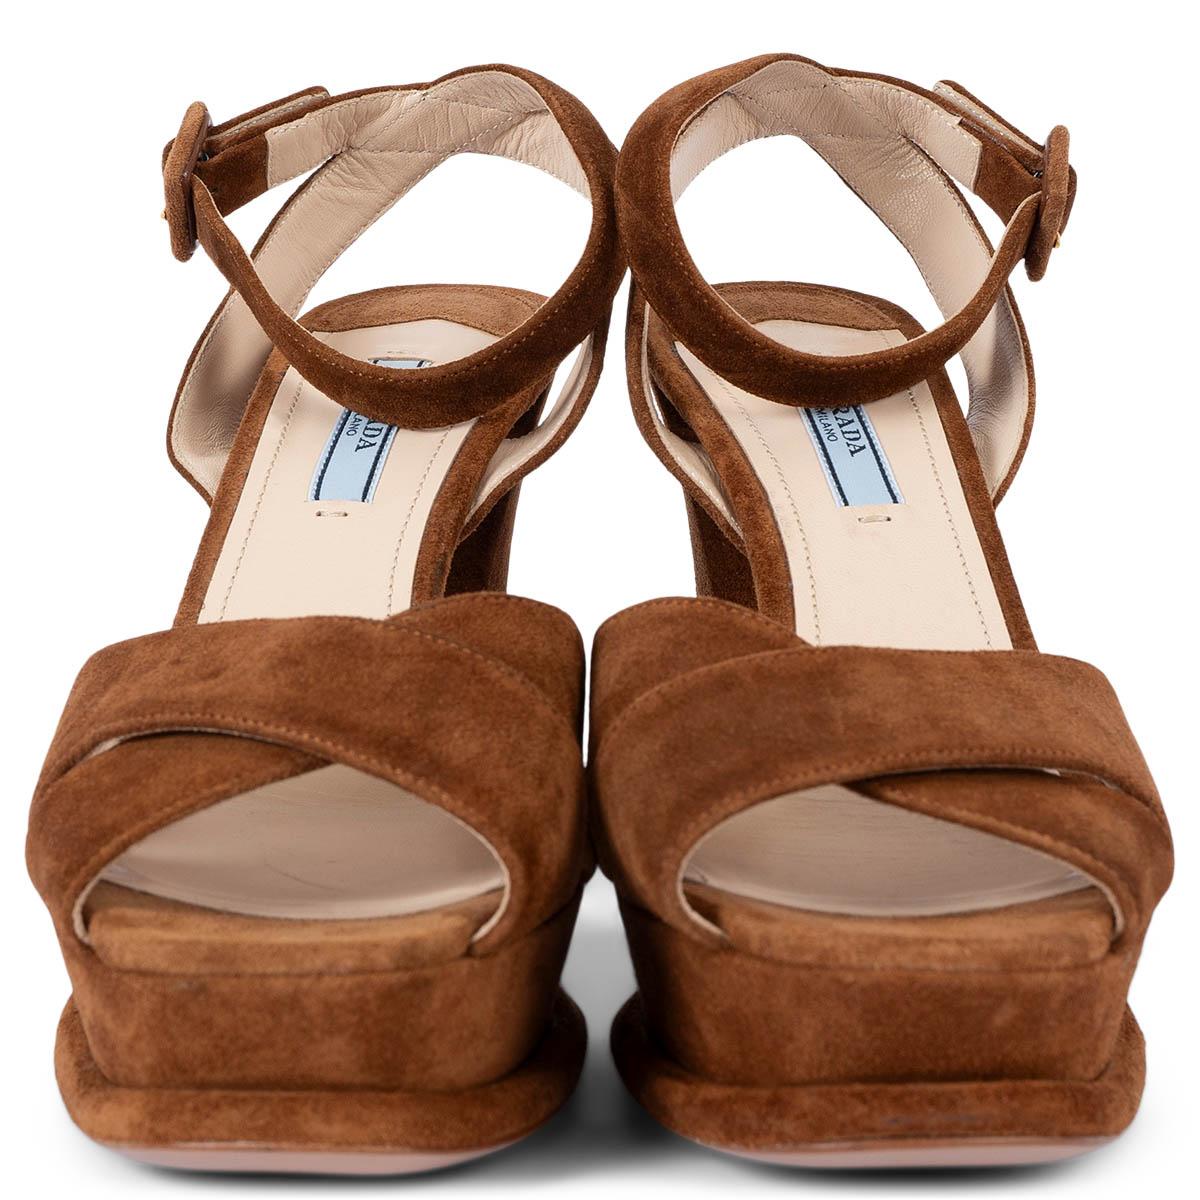 100% authentic  Prada ankle-strap platform sandals in cognac brown suede. Have been worn once inside and are in virtually new condition. 

Measurements
Imprinted Size	40
Shoe Size	40
Inside Sole	26cm (10.1in)
Width	8cm (3.1in)
Heel	11cm